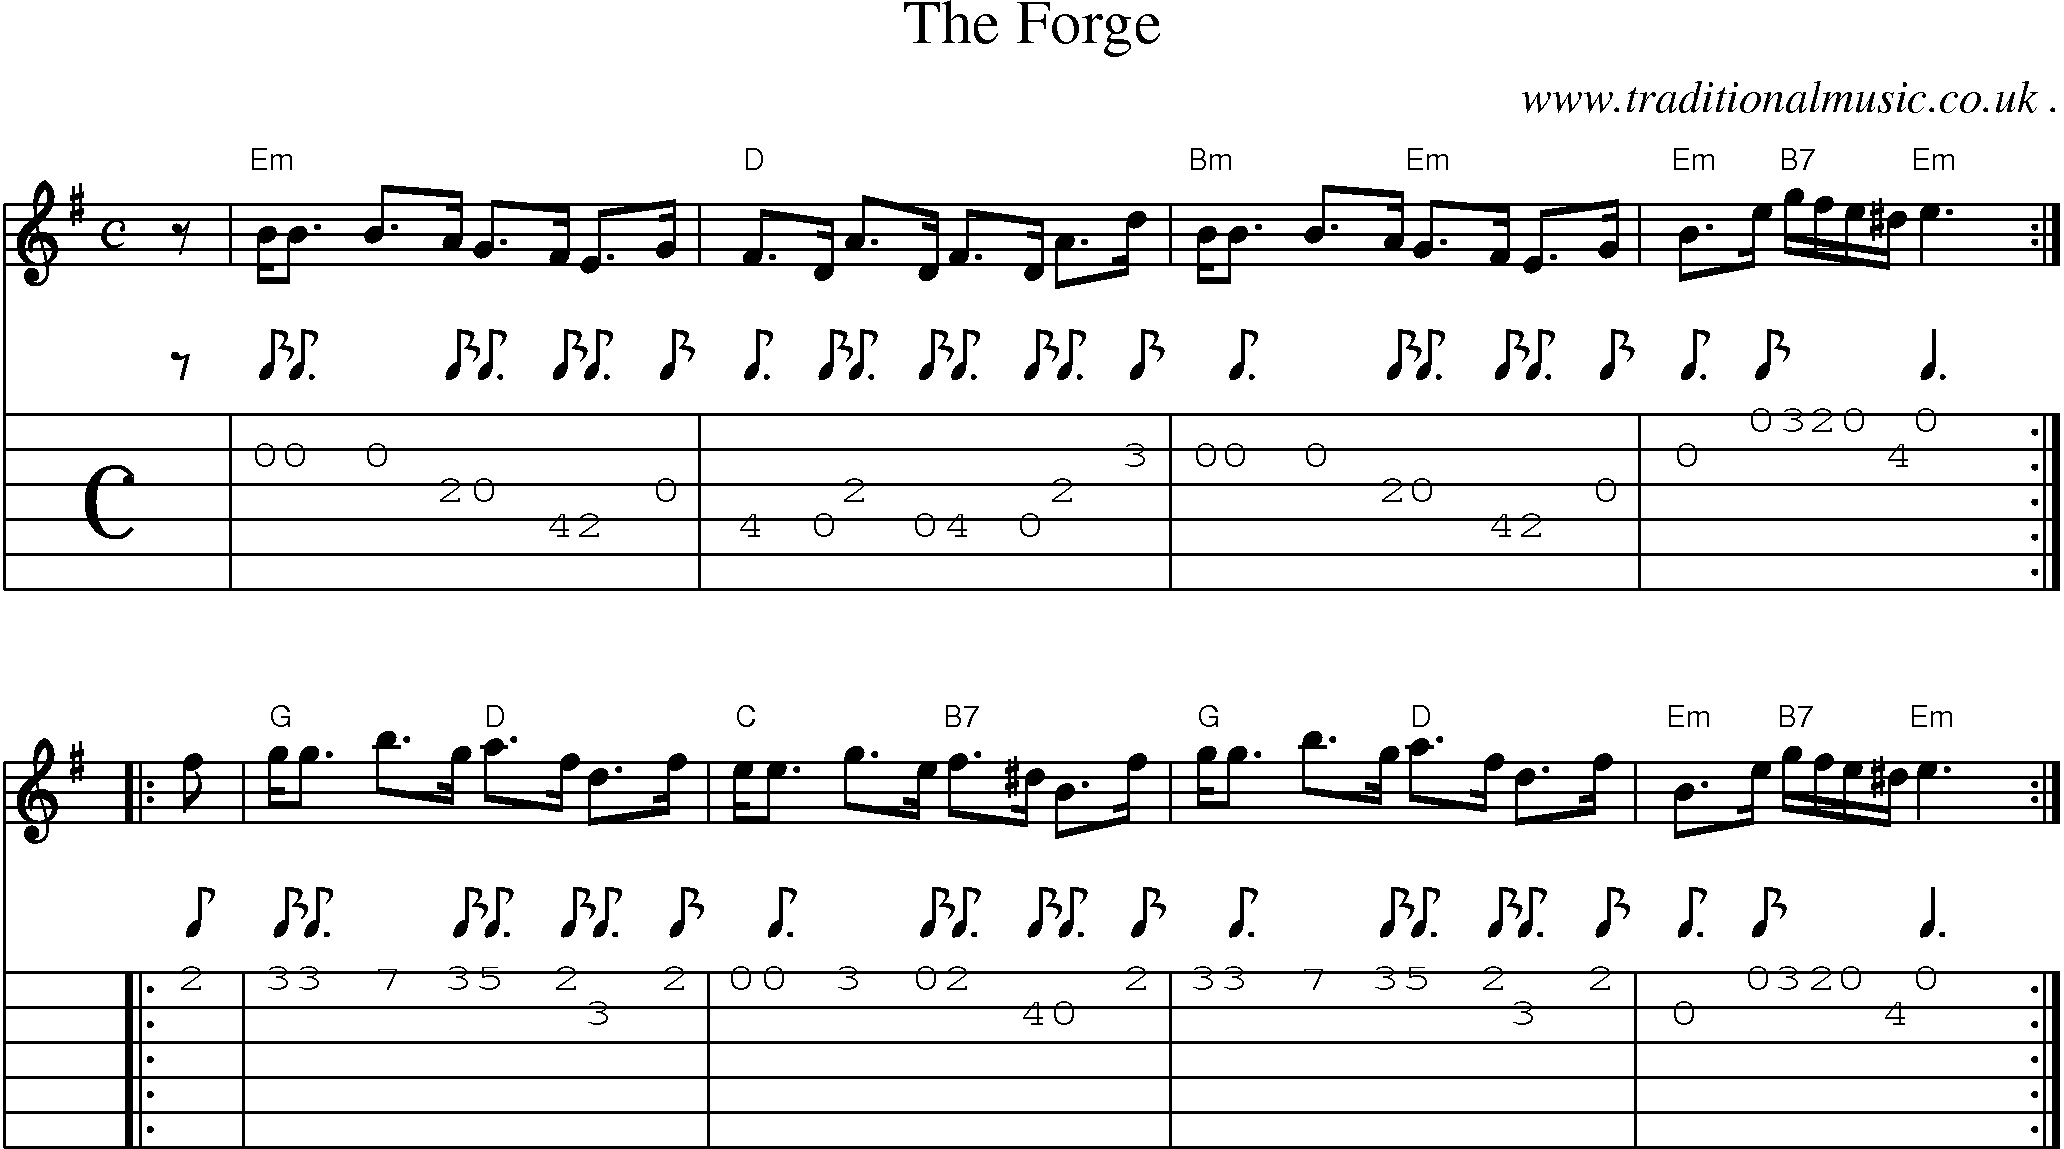 Sheet-music  score, Chords and Guitar Tabs for The Forge